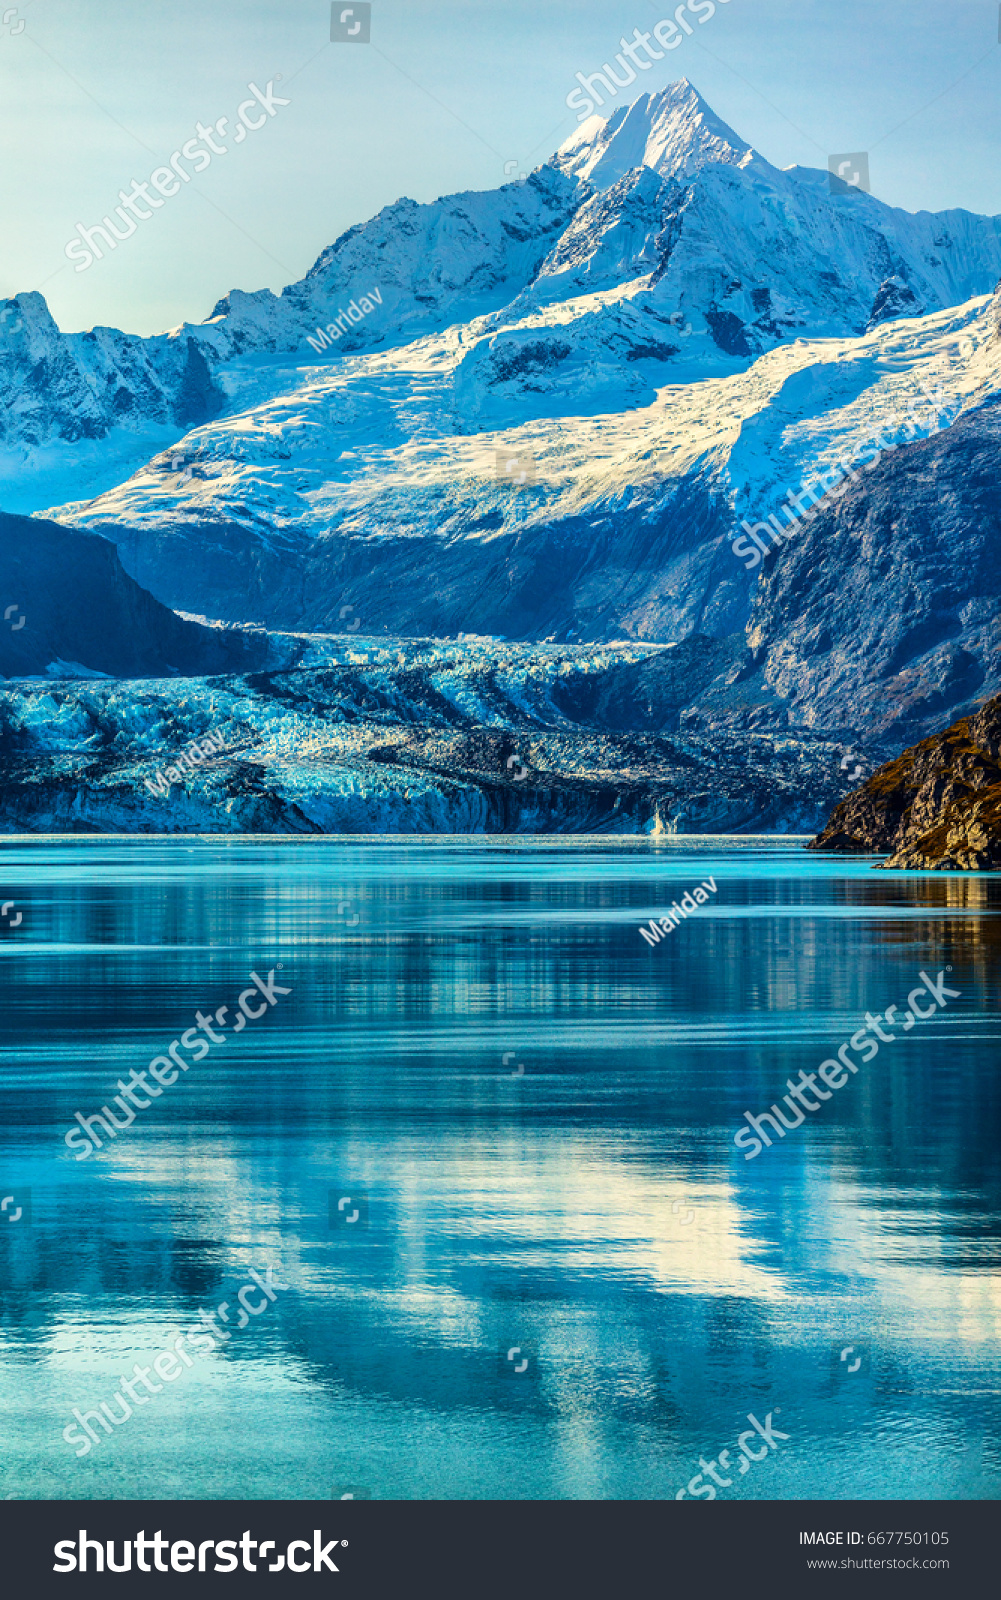 Glacier Bay Alaska cruise vacation travel. Global warming and climate change concept with melting ice. Cruising boat towards landscape of Johns Hopkins Glacier and Mount Fairweather Range mountains. #667750105